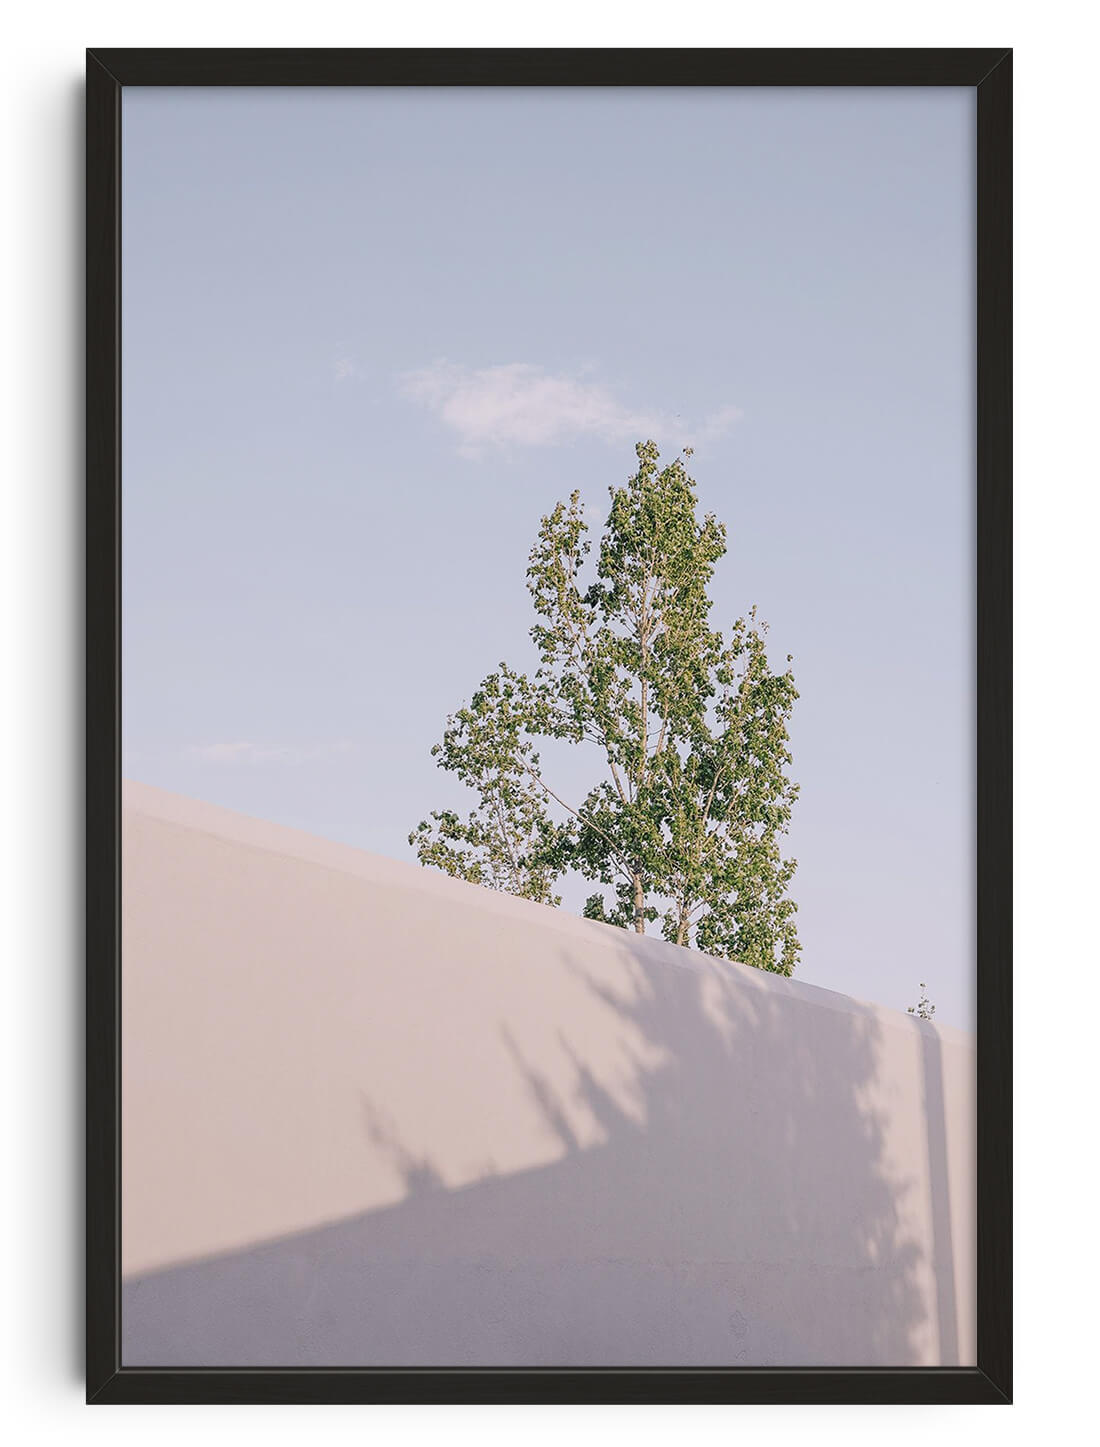 Under The Tree by Margarida contemporary wall art print from DROOL